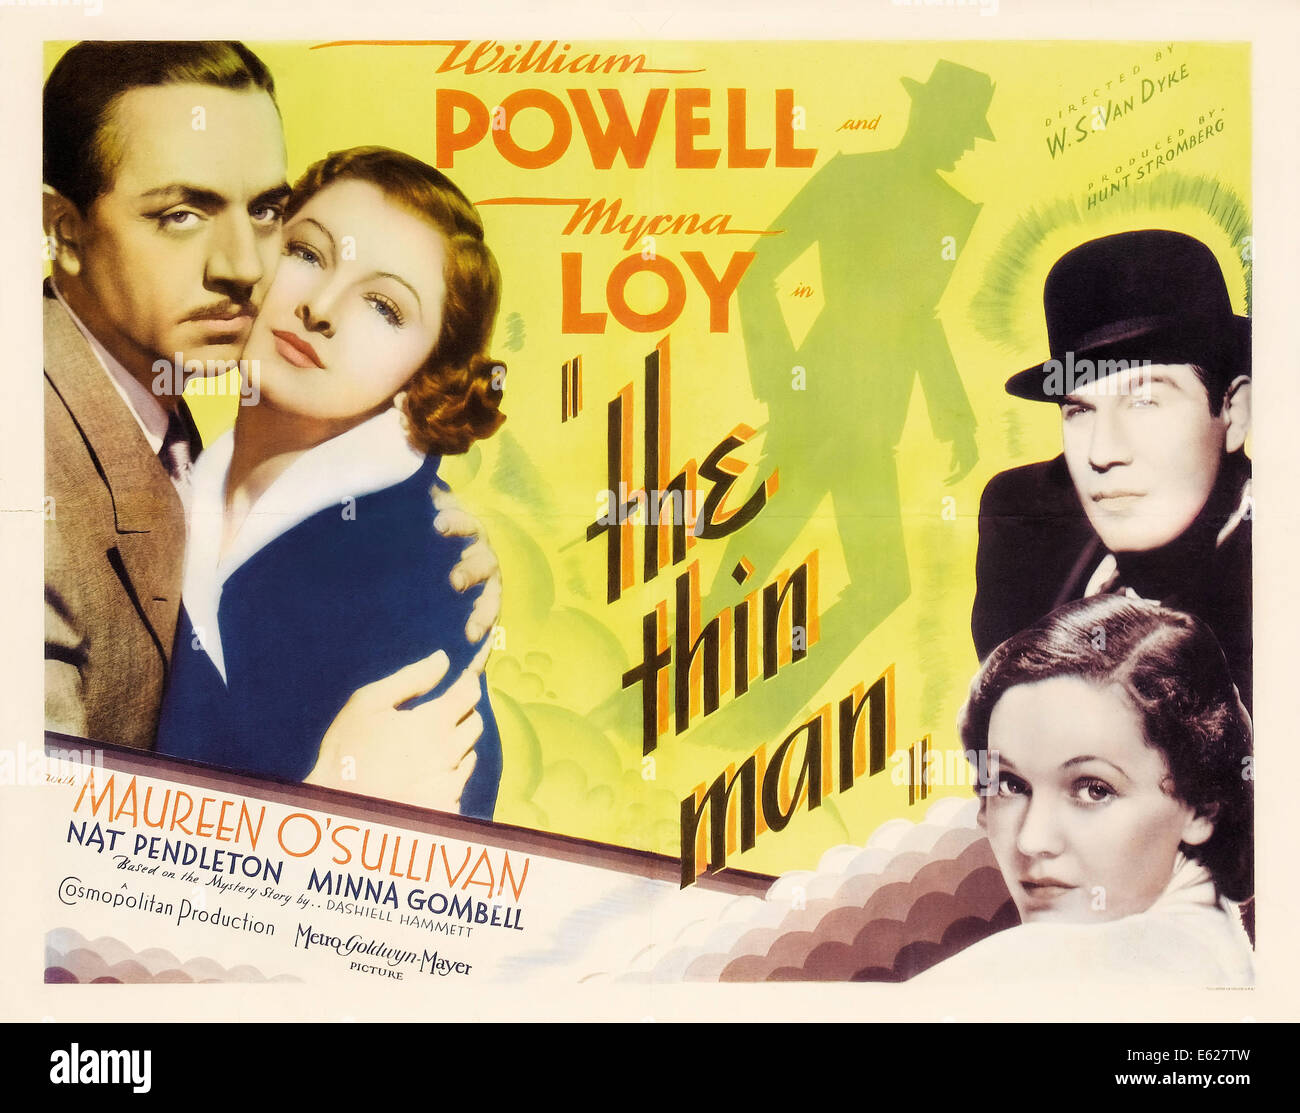 THE THIN MAN - Movie Poster - Directed by W.S. Van Dyke - MGM 1934 Stock Photo